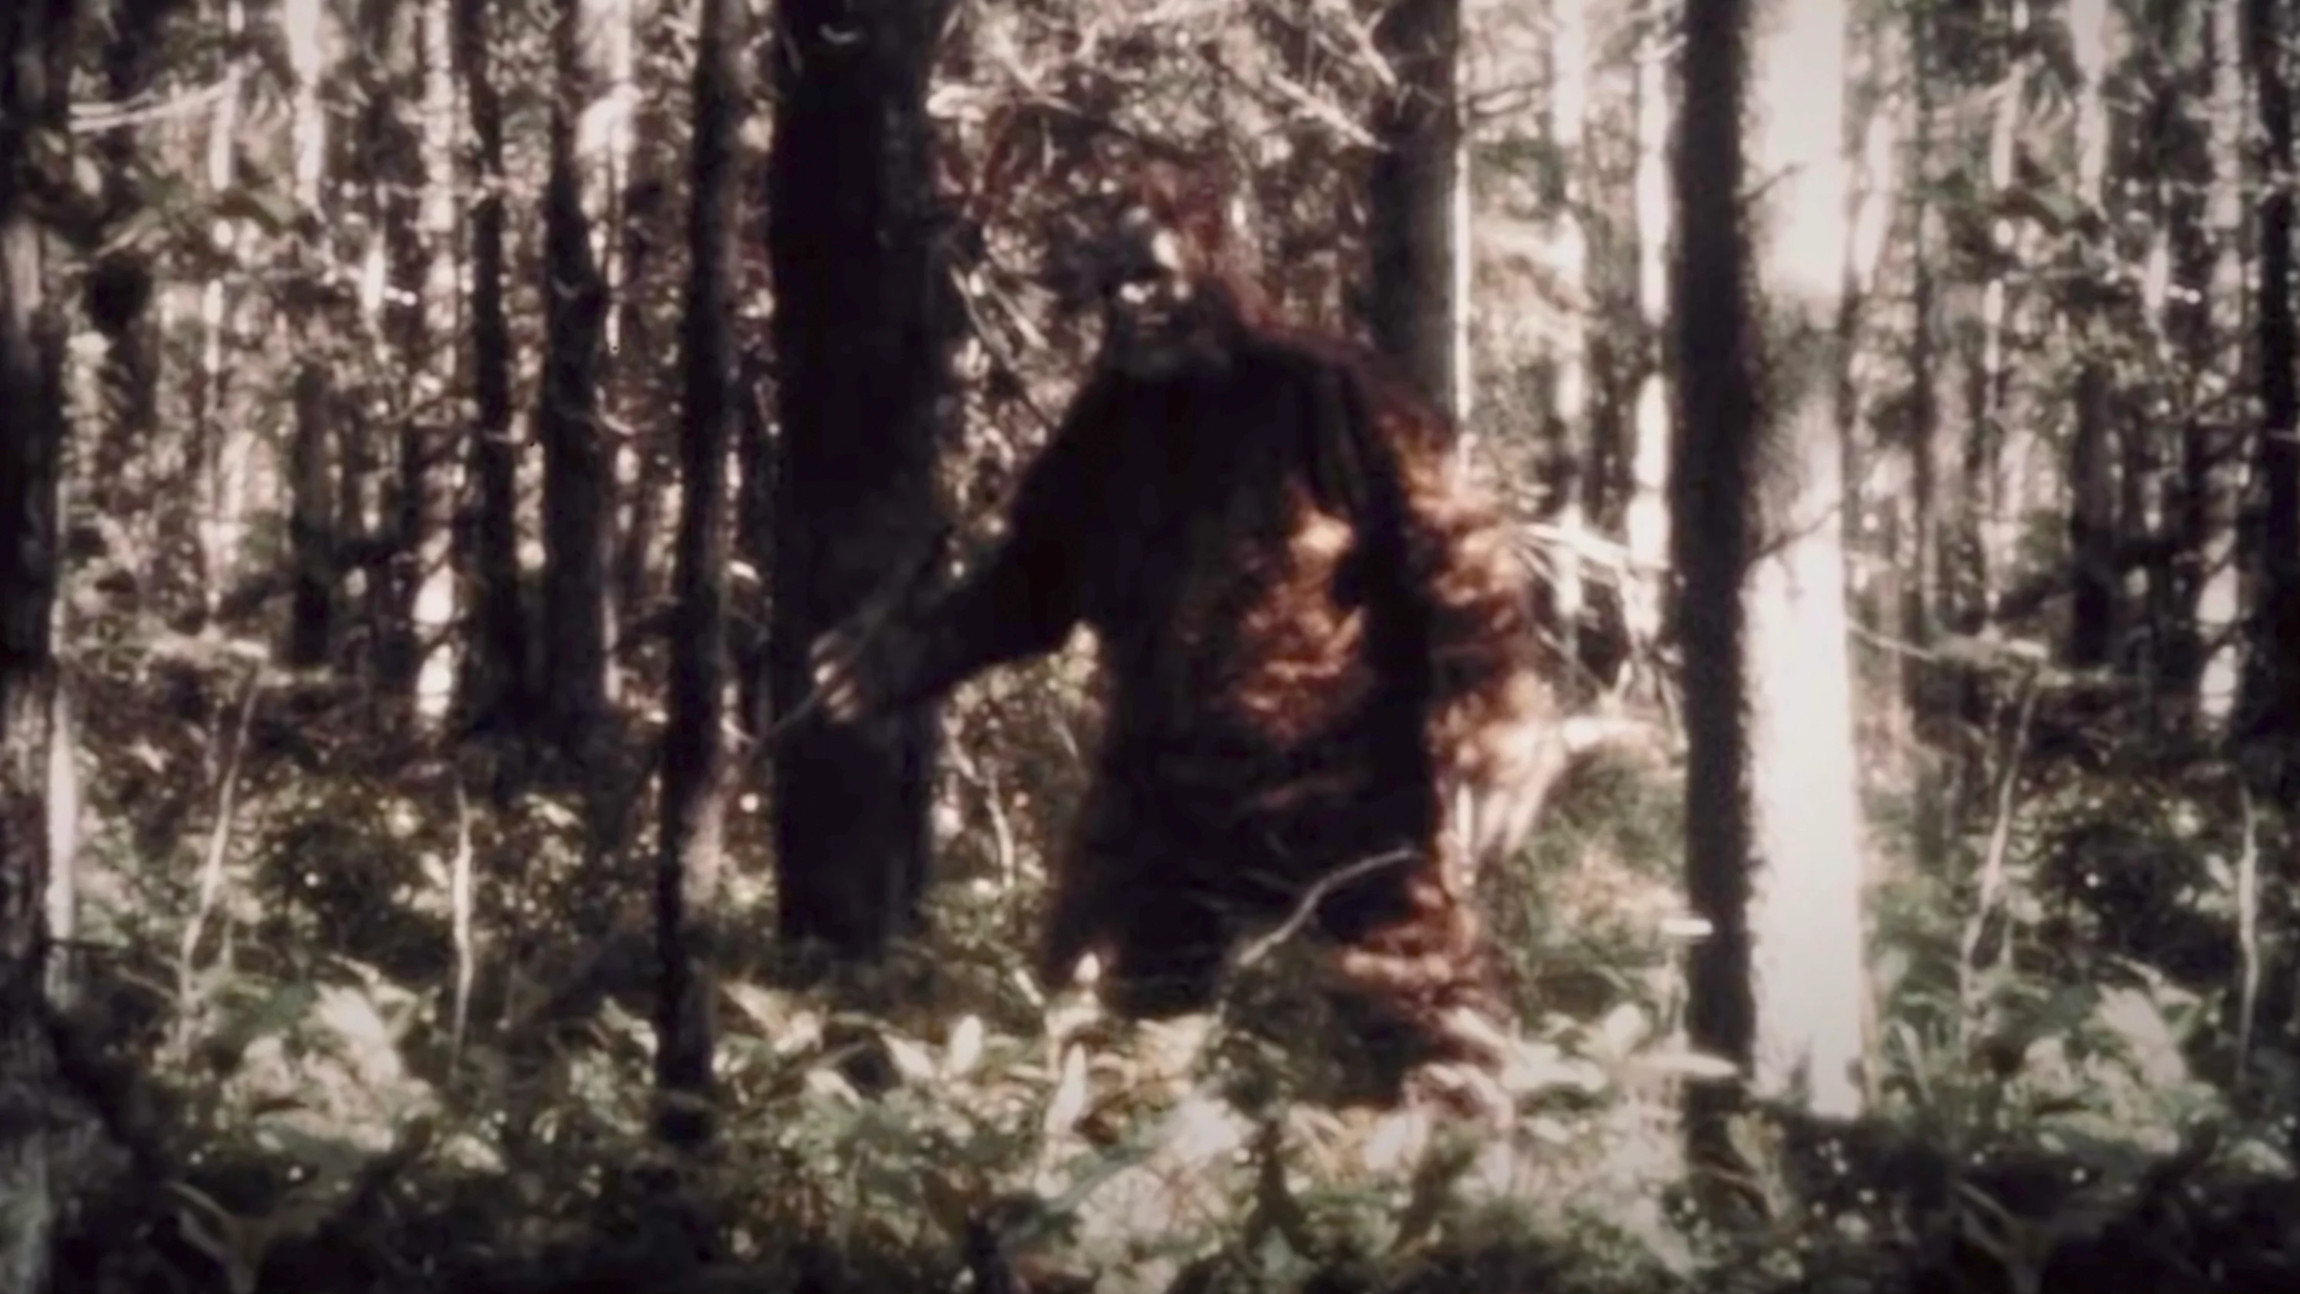 Is Bigfoot a serial killer? Find out in Hulu's newest documentary